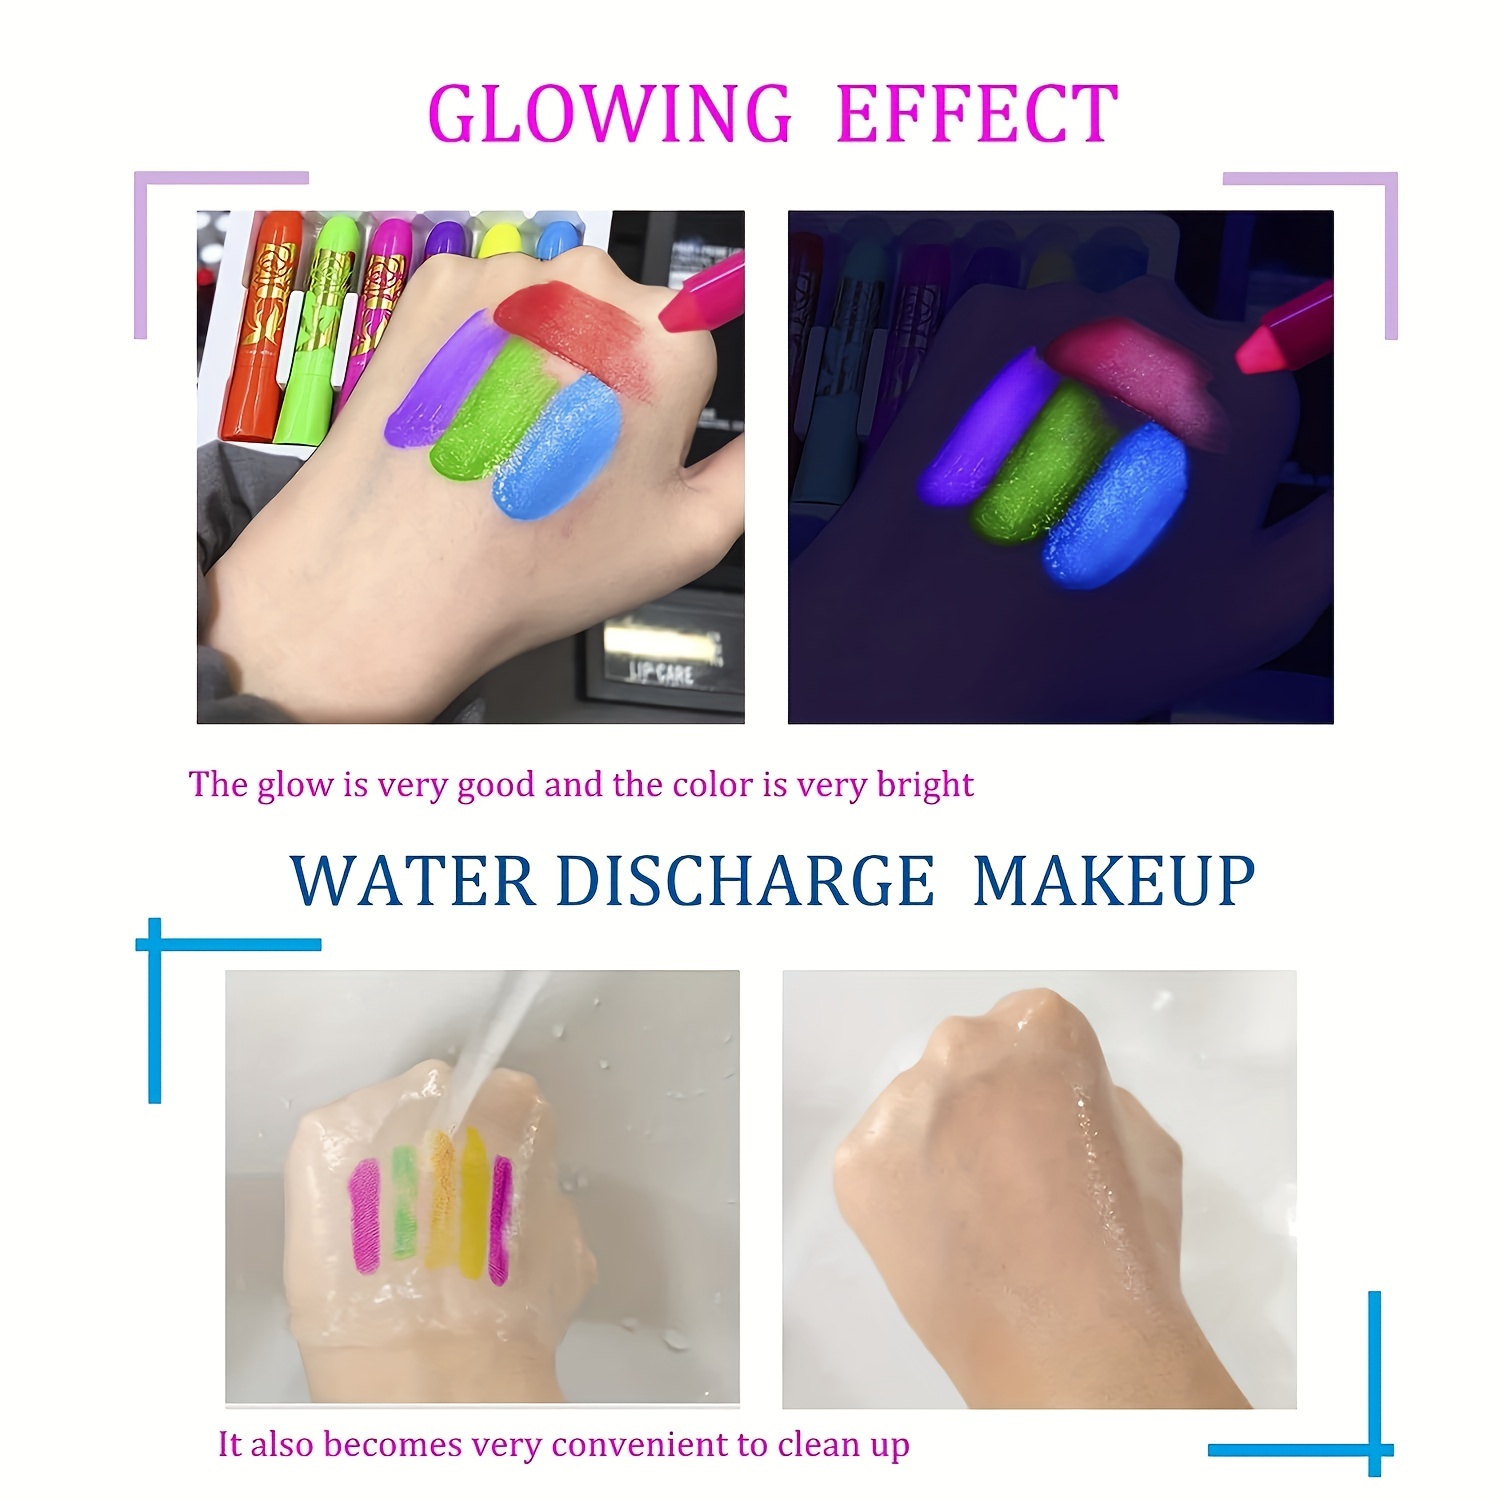 UV Glow - Neon UV Paint Stick/Face & Body Crayon - Genuine and original UV  Glow product - glows brightly under Blacklights! (Set of 4)